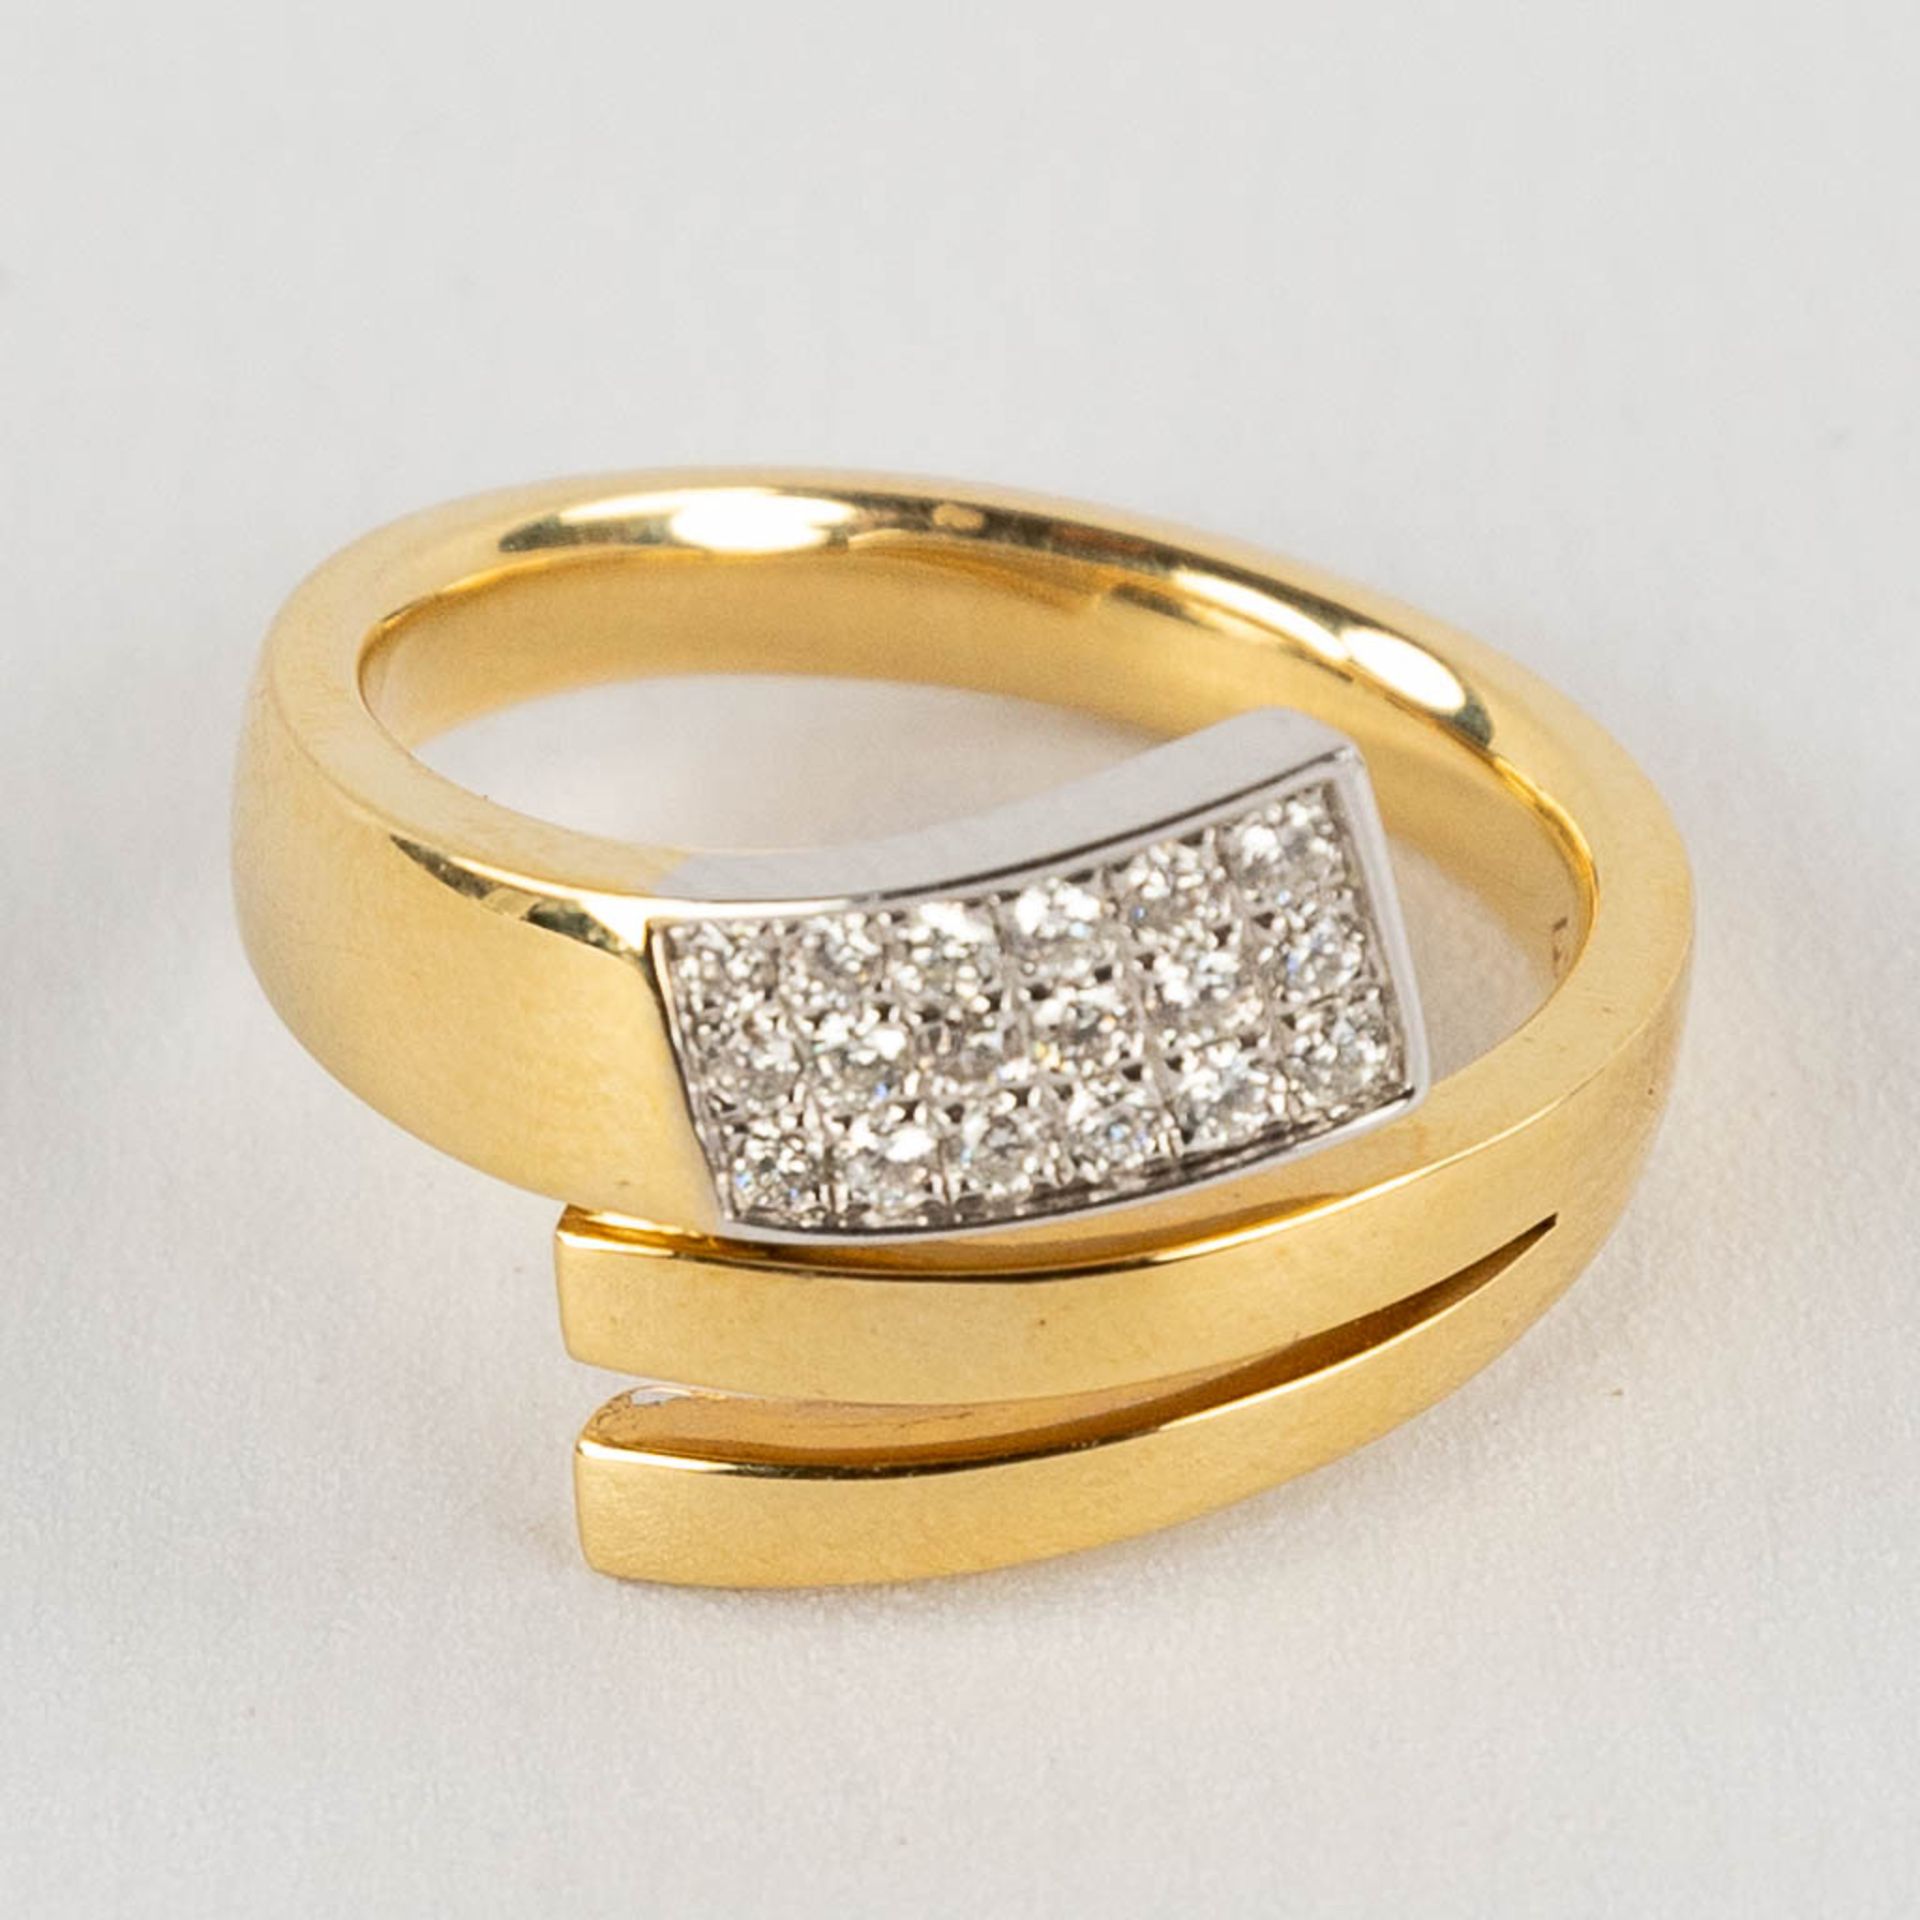 A ring, 18kt yellow gold with diamonds, appr. 0,42ct, ring size 55.